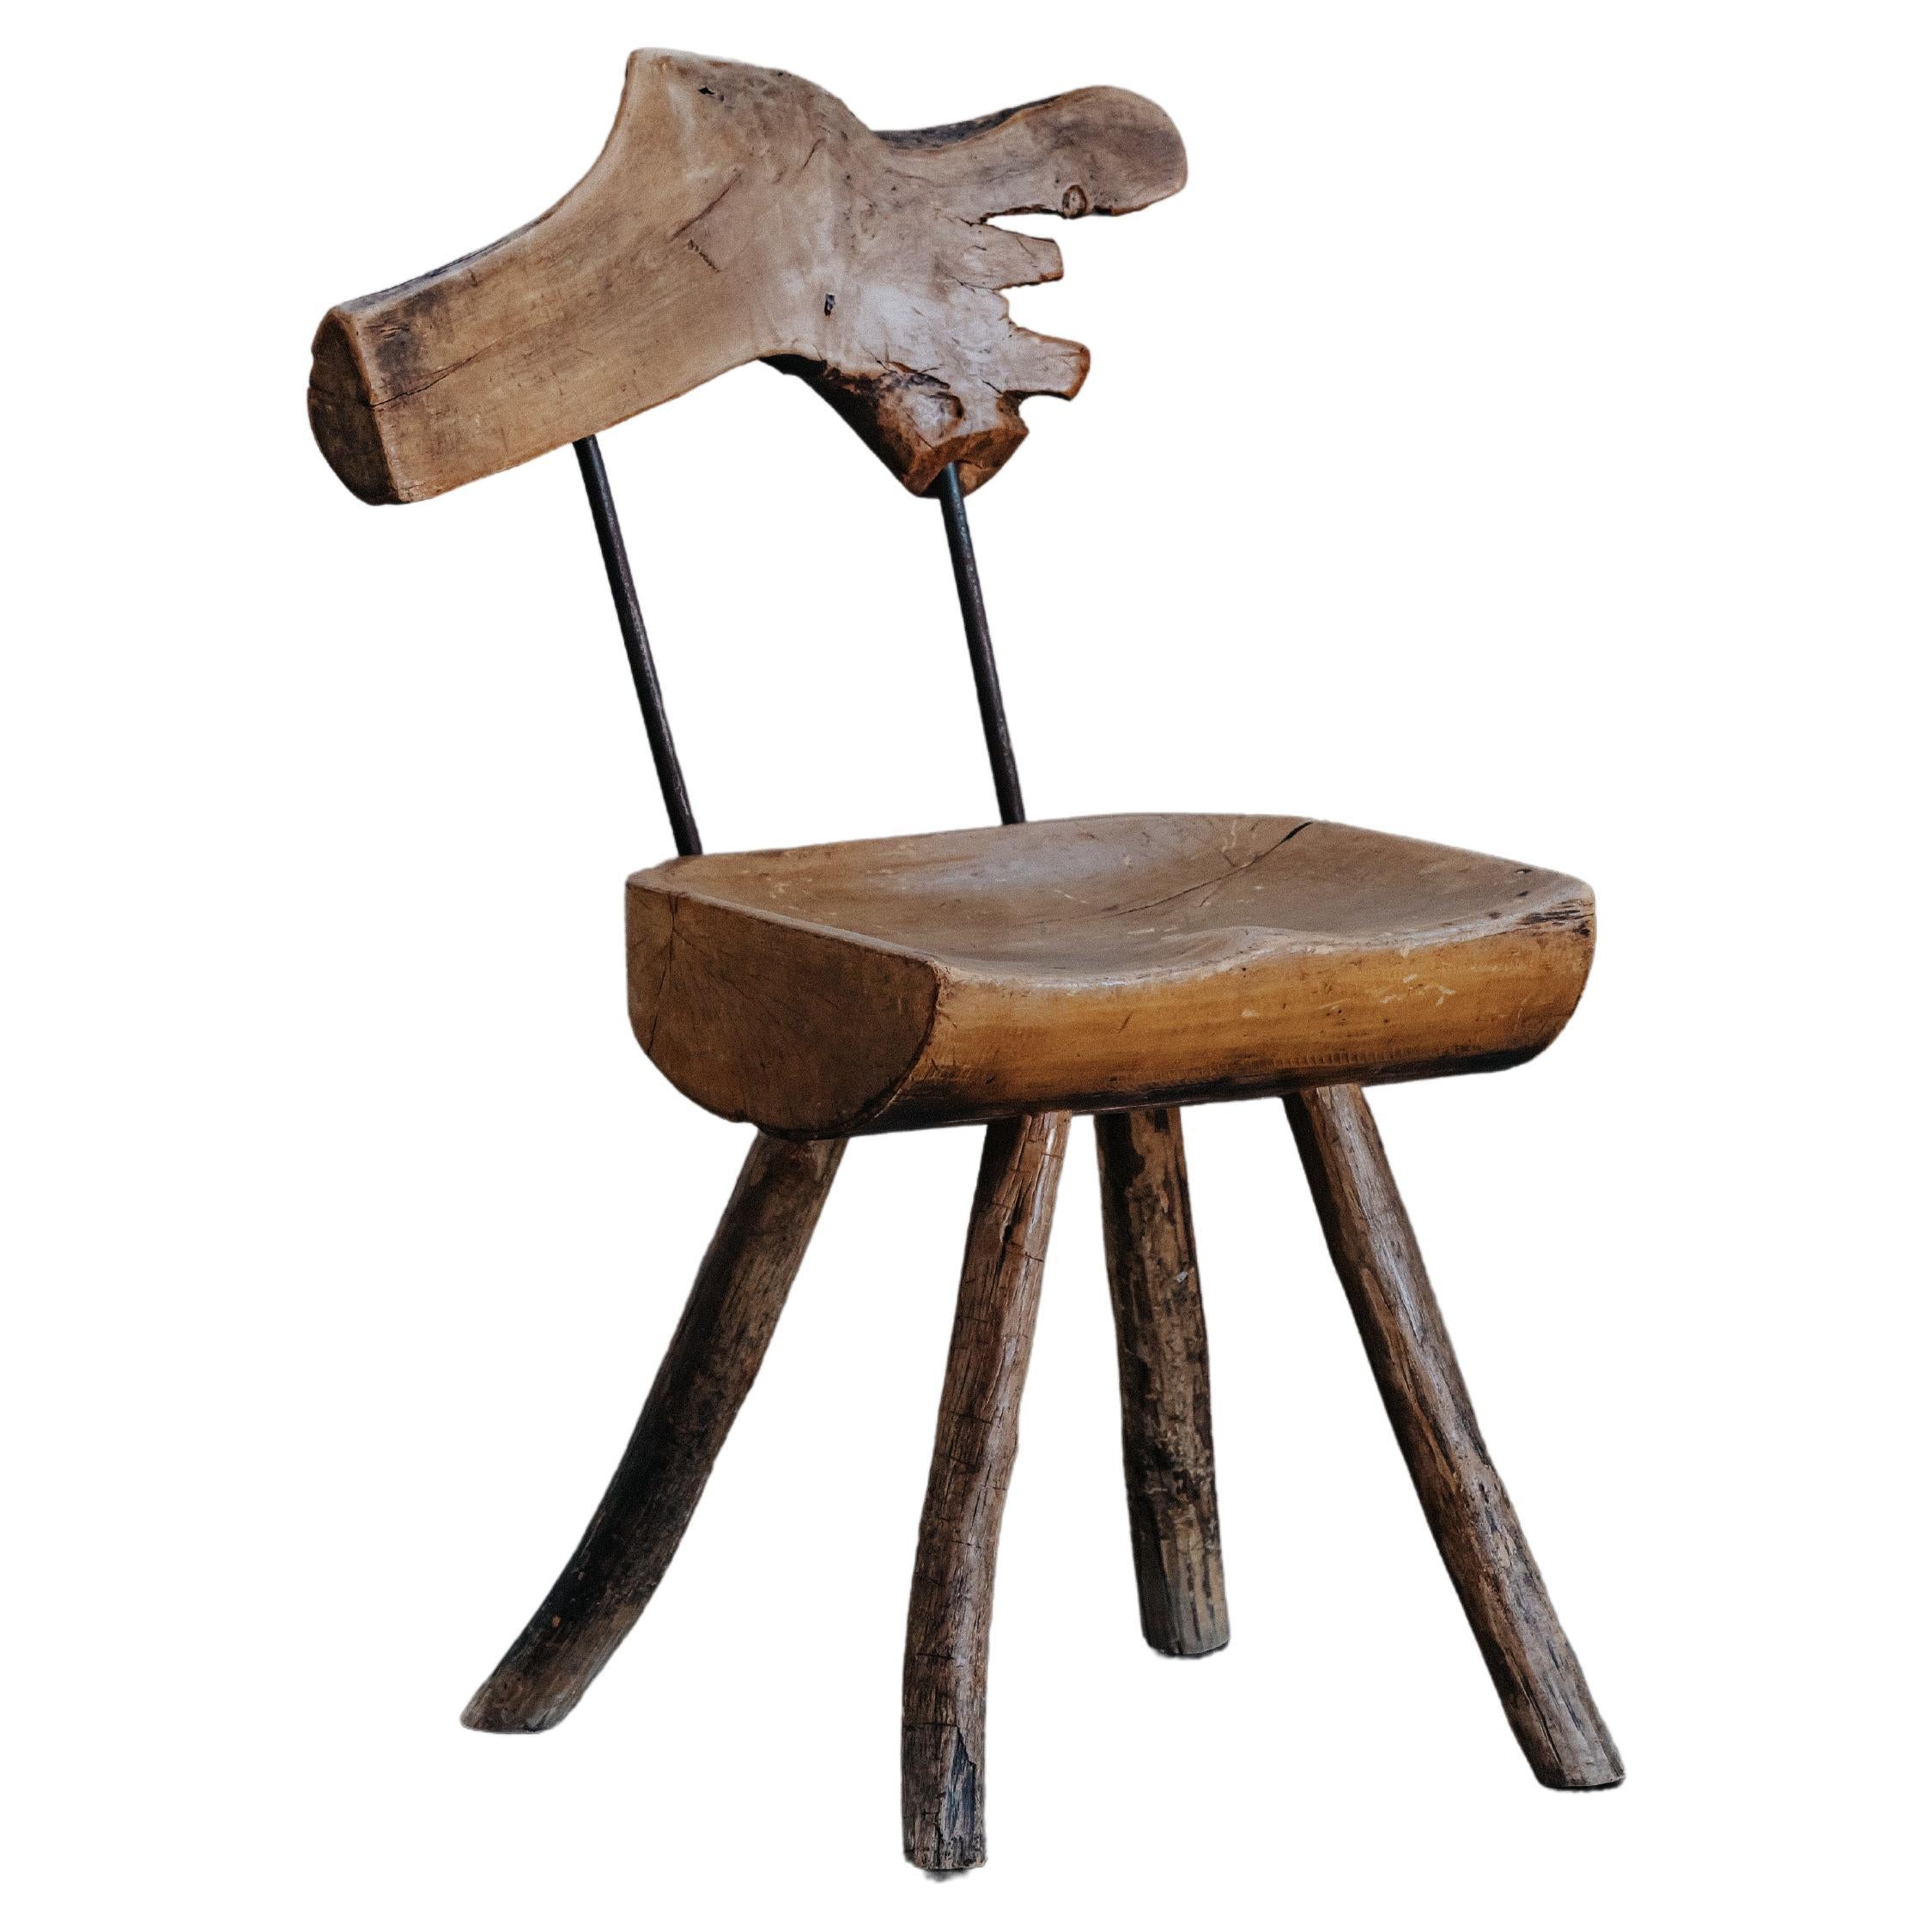 Primitive Pine And Steel Chair, Circa 1950